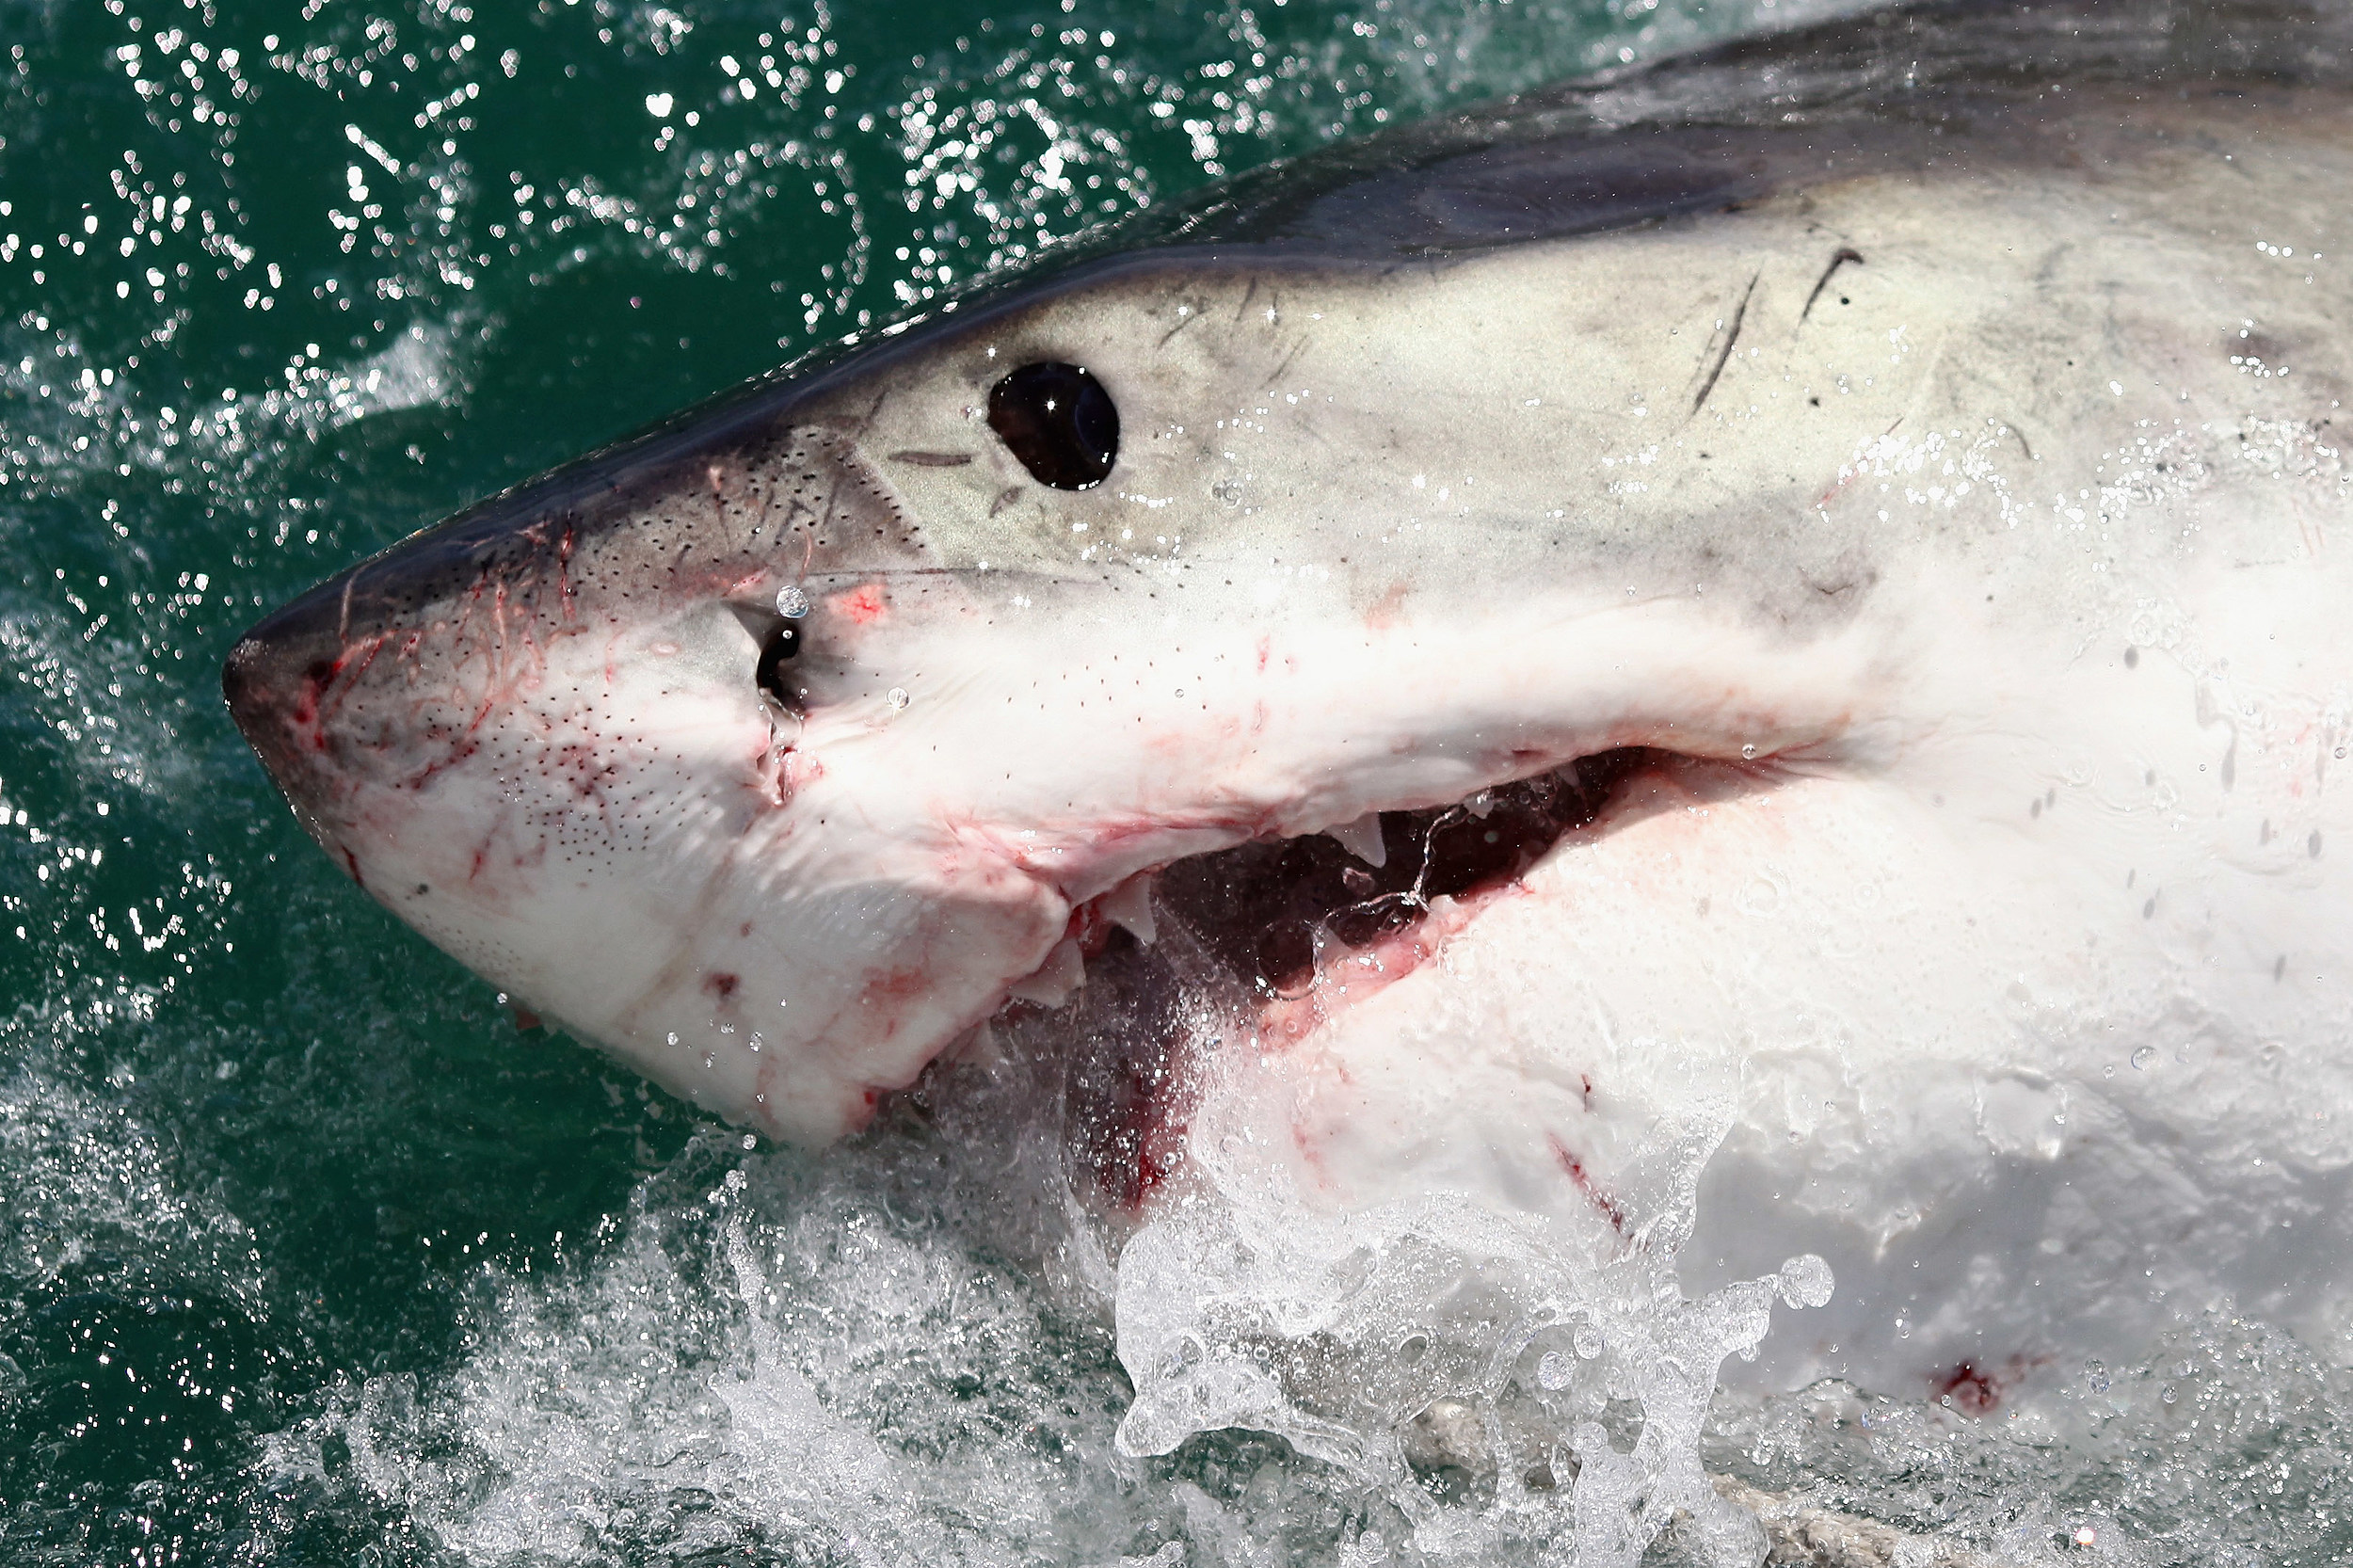 Another Great White Shark spotted off the Jersey coast